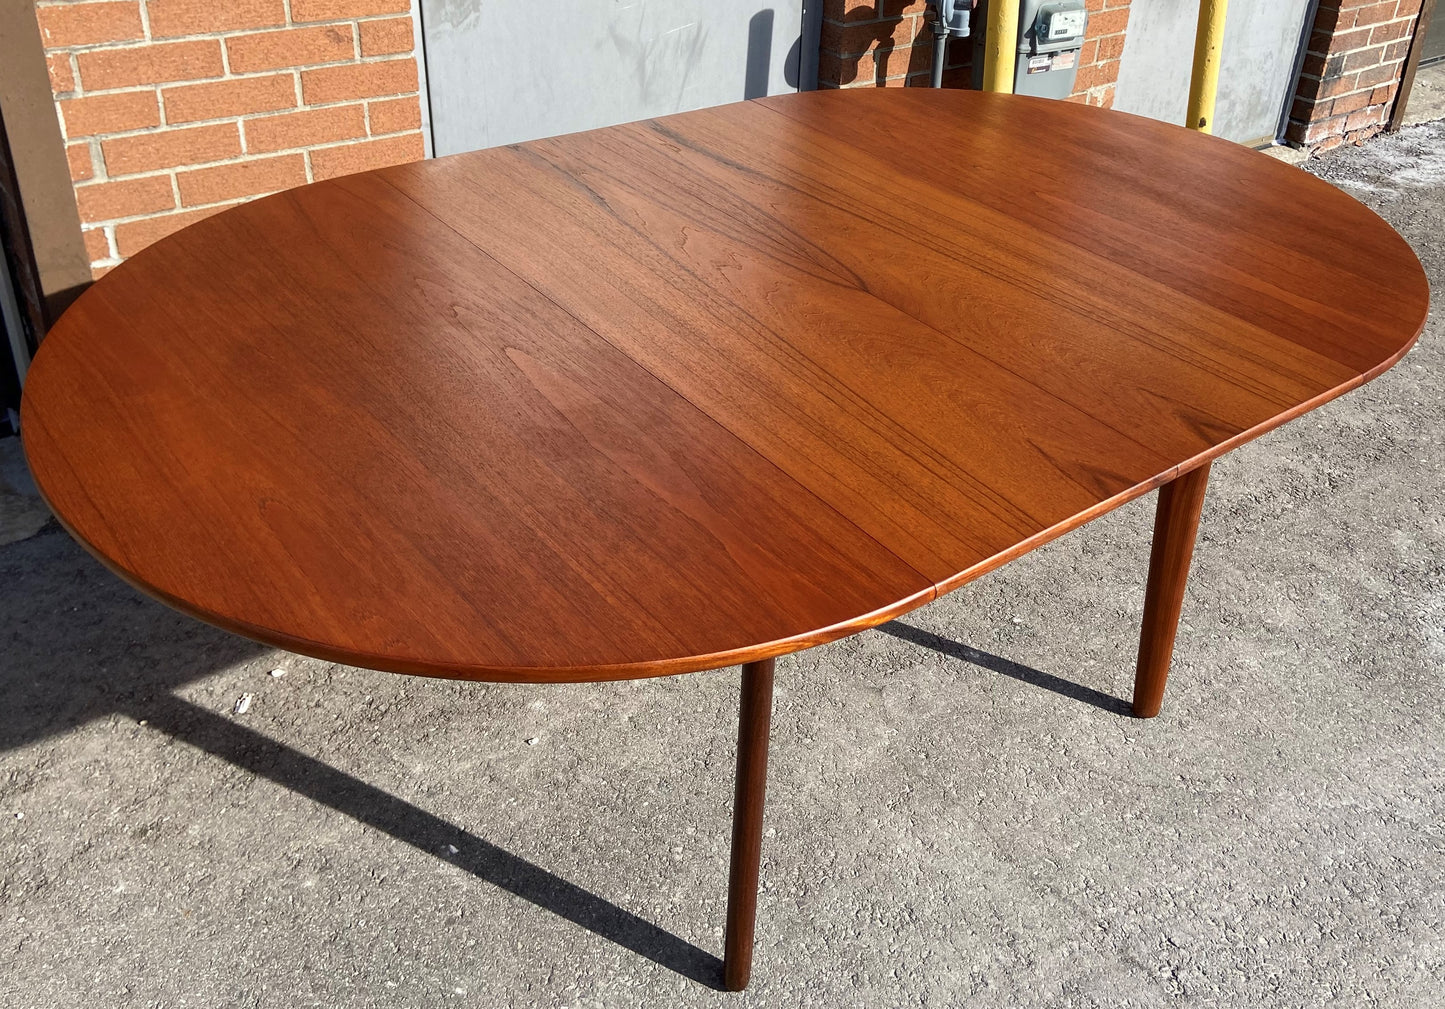 REFINISHED Danish MCM Teak Dining Table Round w 2 Leaves 47"-75" Perfect